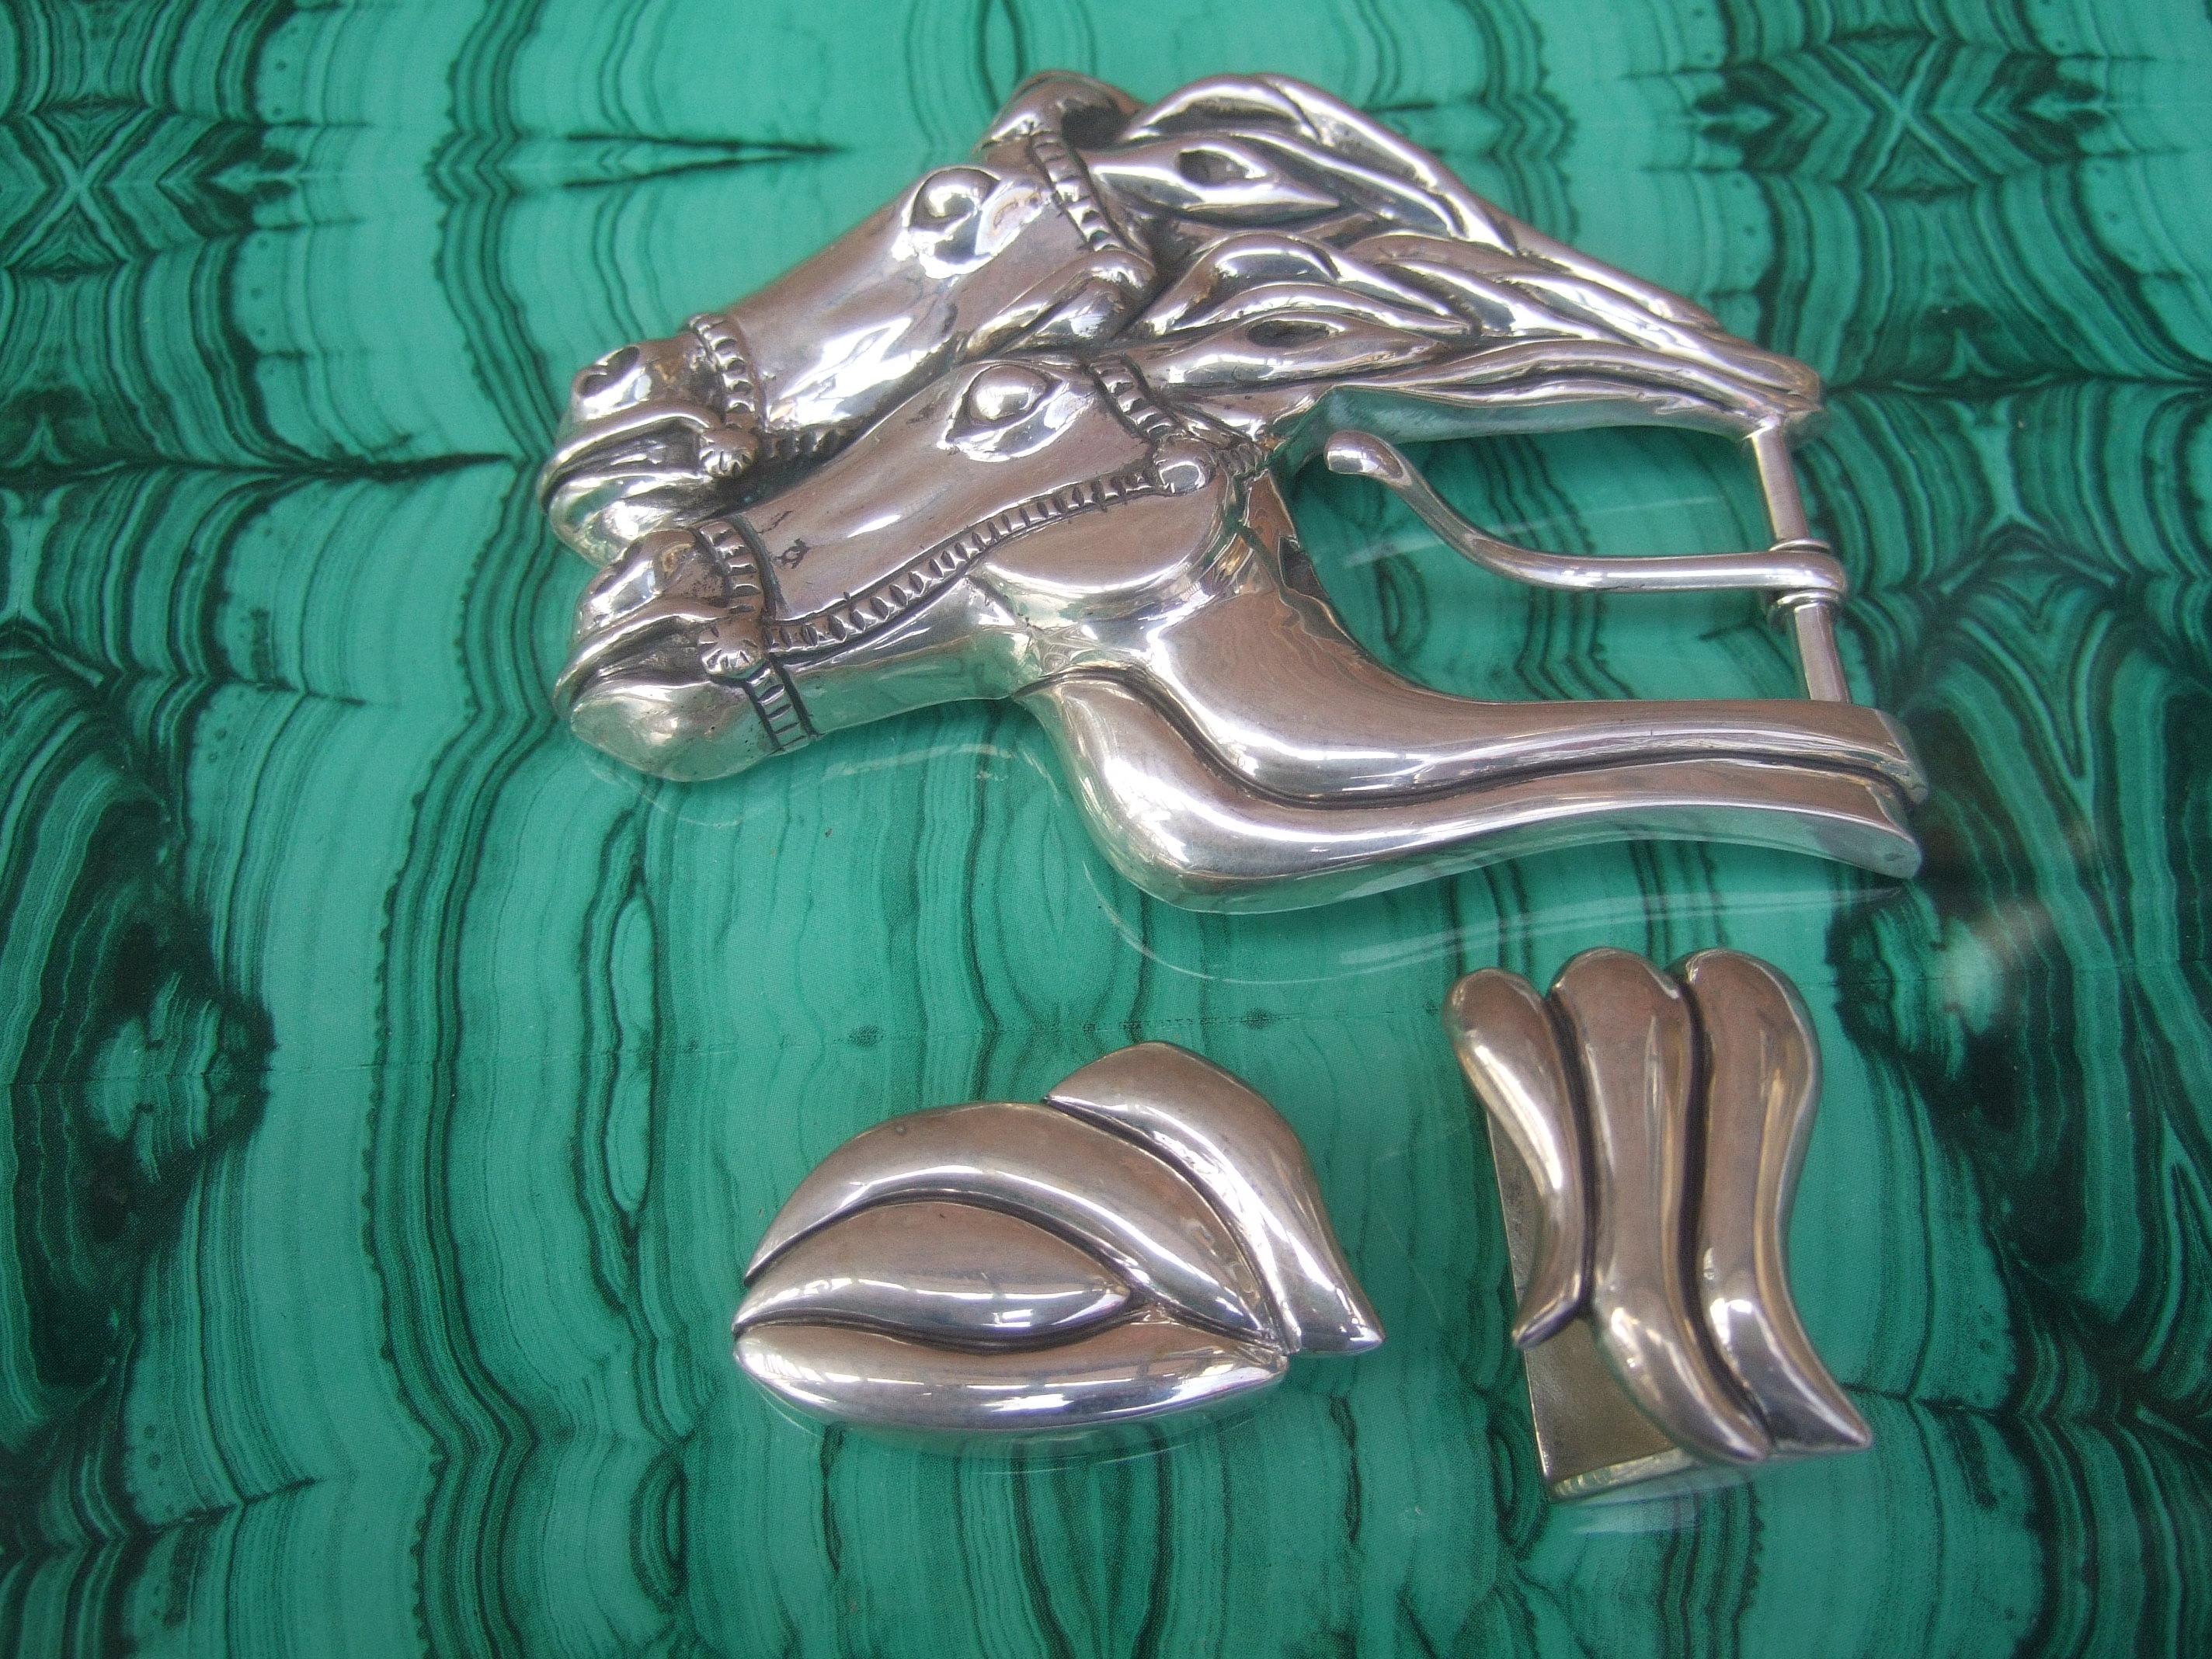 Sterling silver massive equine belt buckle designed by Kokopelli 
The ornate belt buckle is designed with a stylized pair of sterling
silver horse heads

The large scale artisan belt buckle makes a very striking accessory 
Paired with a set of